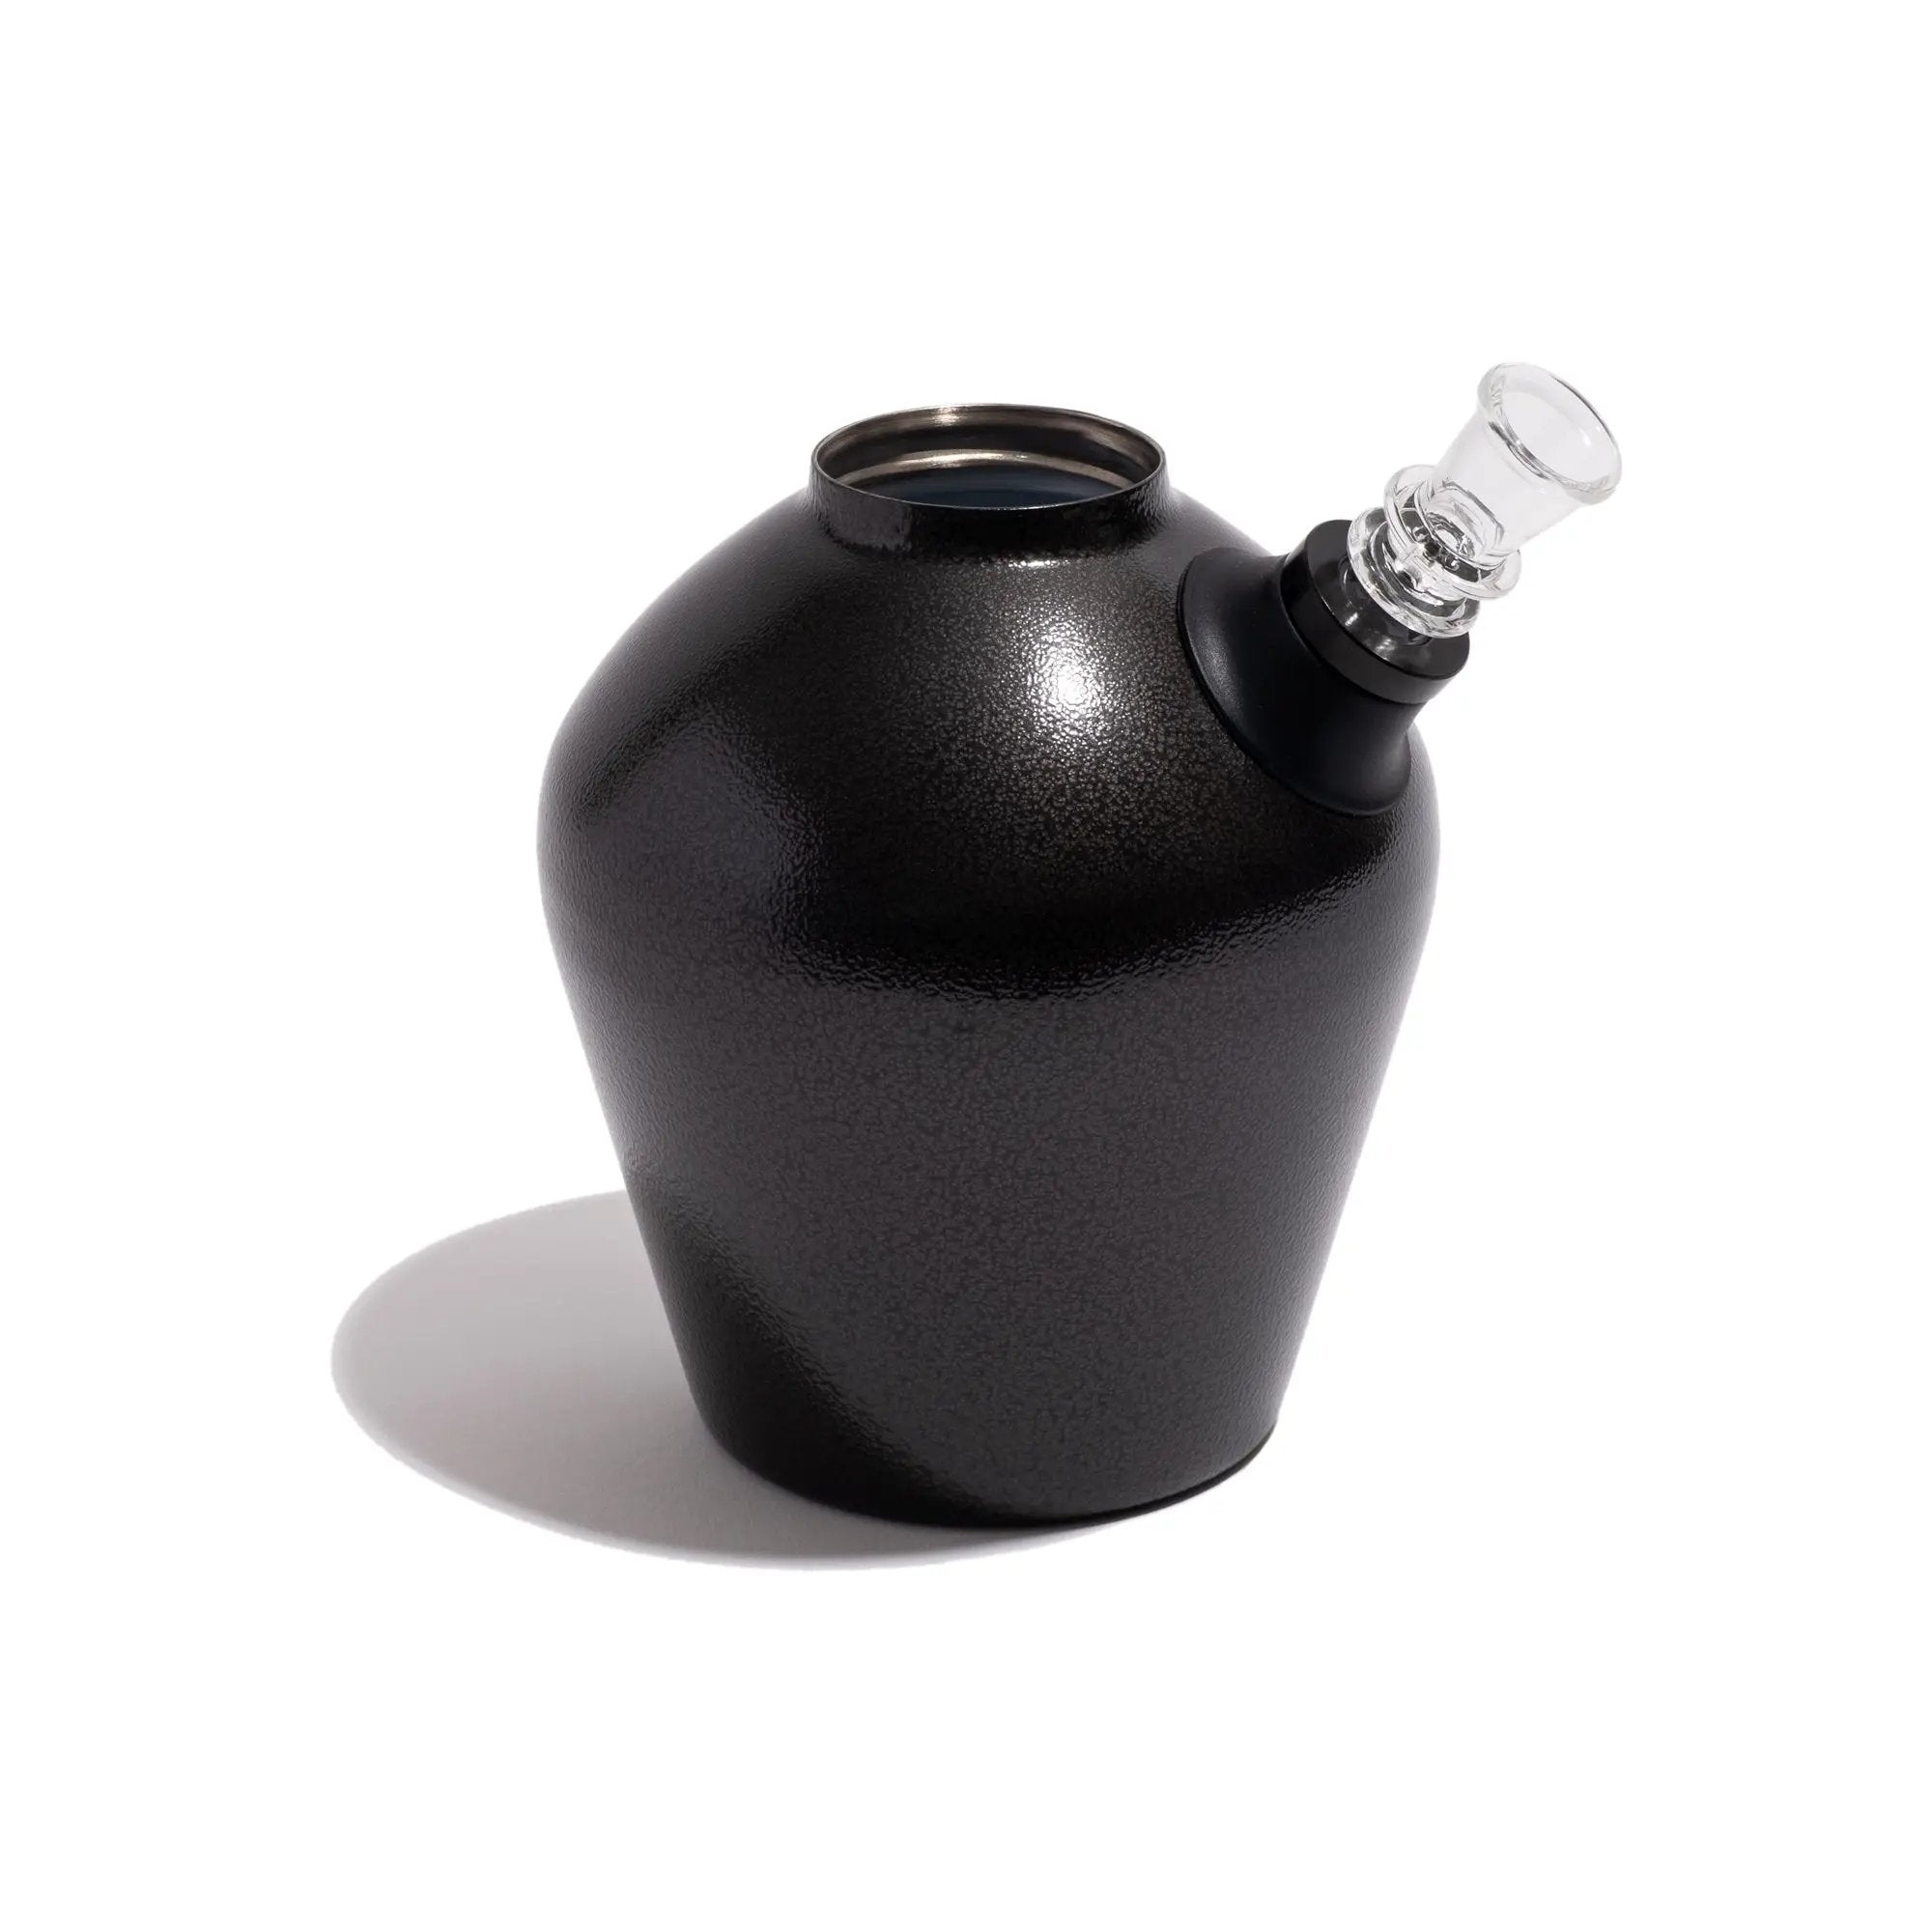 Chill - Limited Edition - Black Armored by Chill Steel Pipes